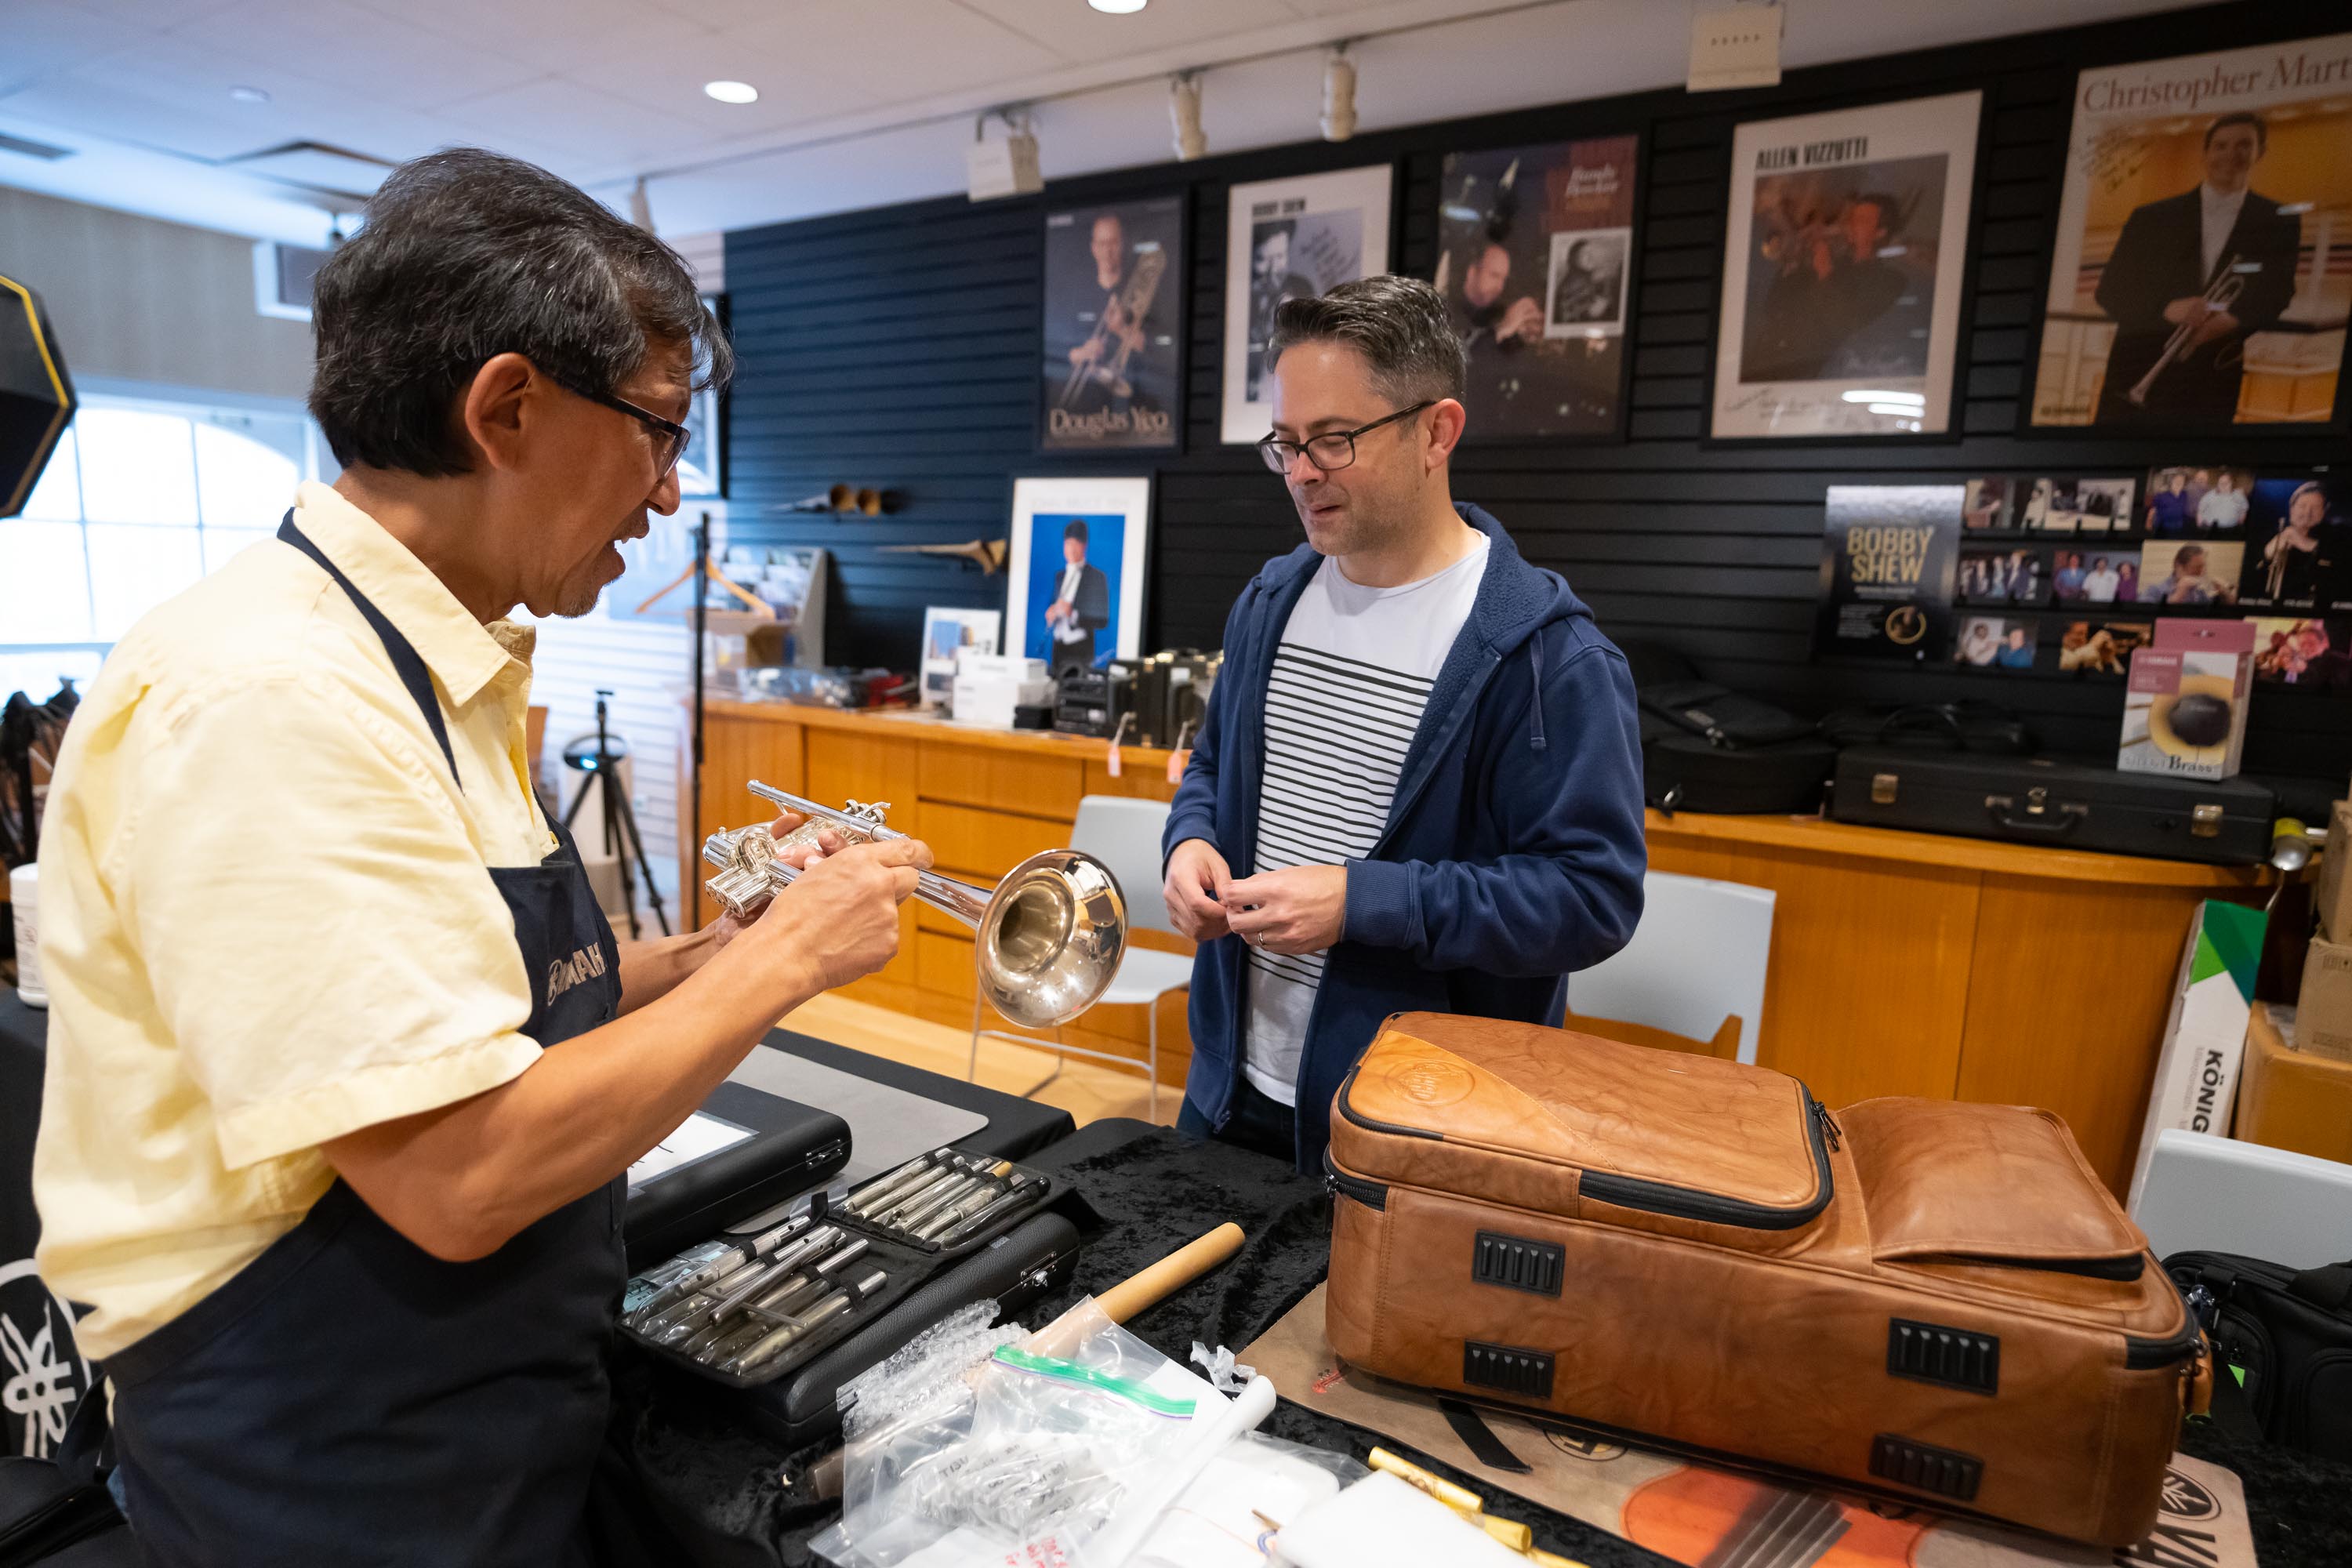 Anthony Prisk takes advantage of some free time before he has to return to the airport by visiting an instrument shop in New York City